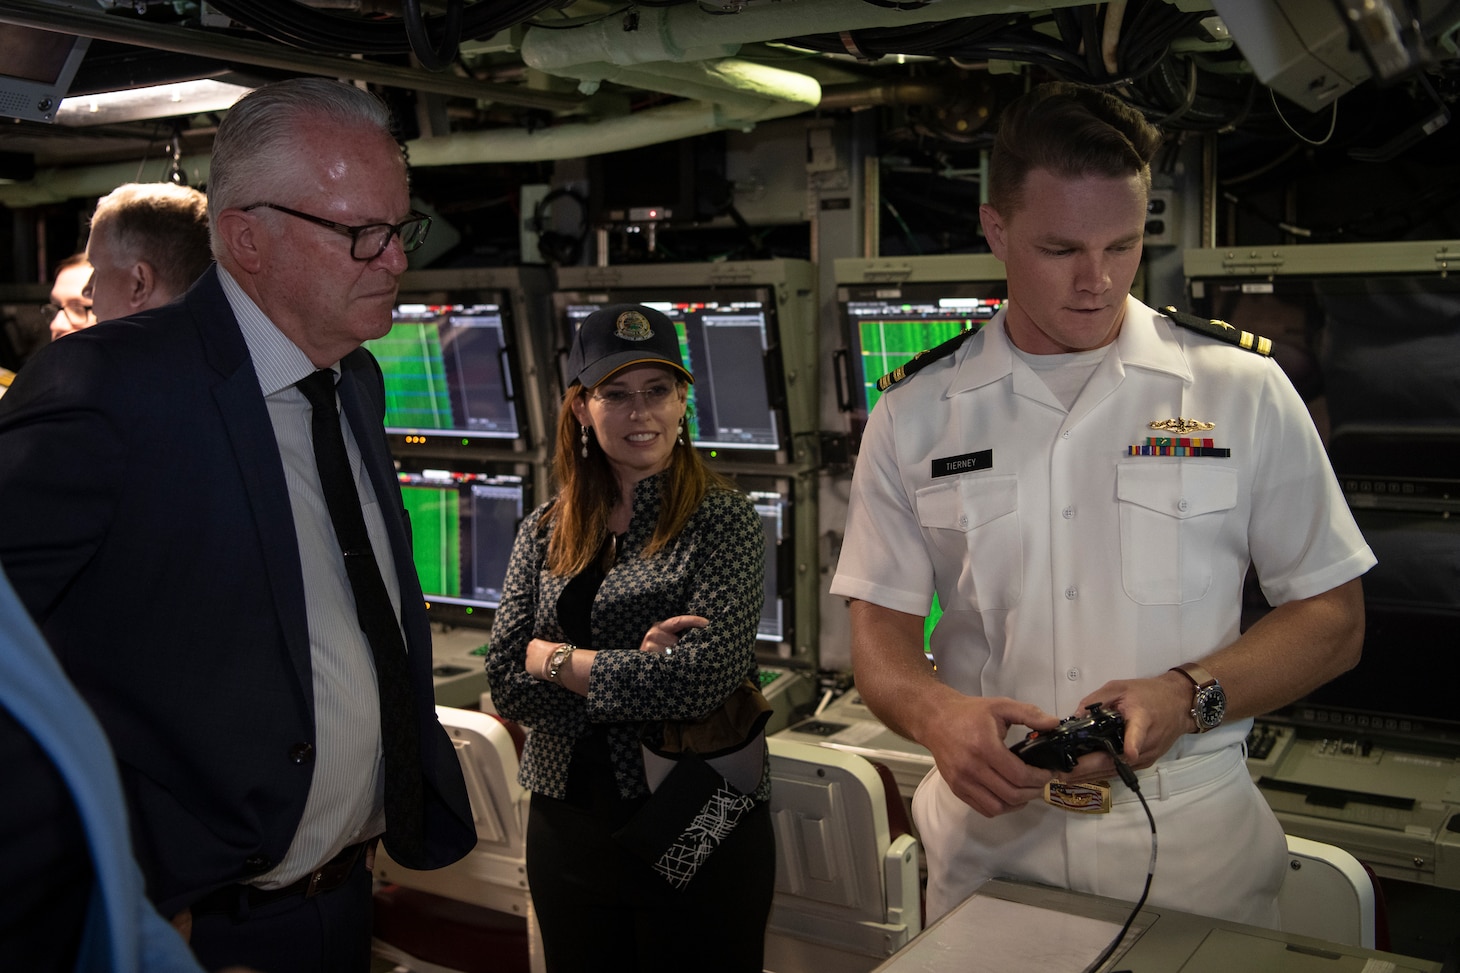 Lt. Bryan Tierney, assigned to the Virginia-class fast-attack submarine USS Mississippi (SSN 782), speaks to distinguished visitors during a tour of the submarine, Nov. 30. Mississippi is visiting HMAS Stirling Naval Base to enhance interoperability, communication, and strengthen relationships with the Royal Australian Navy.